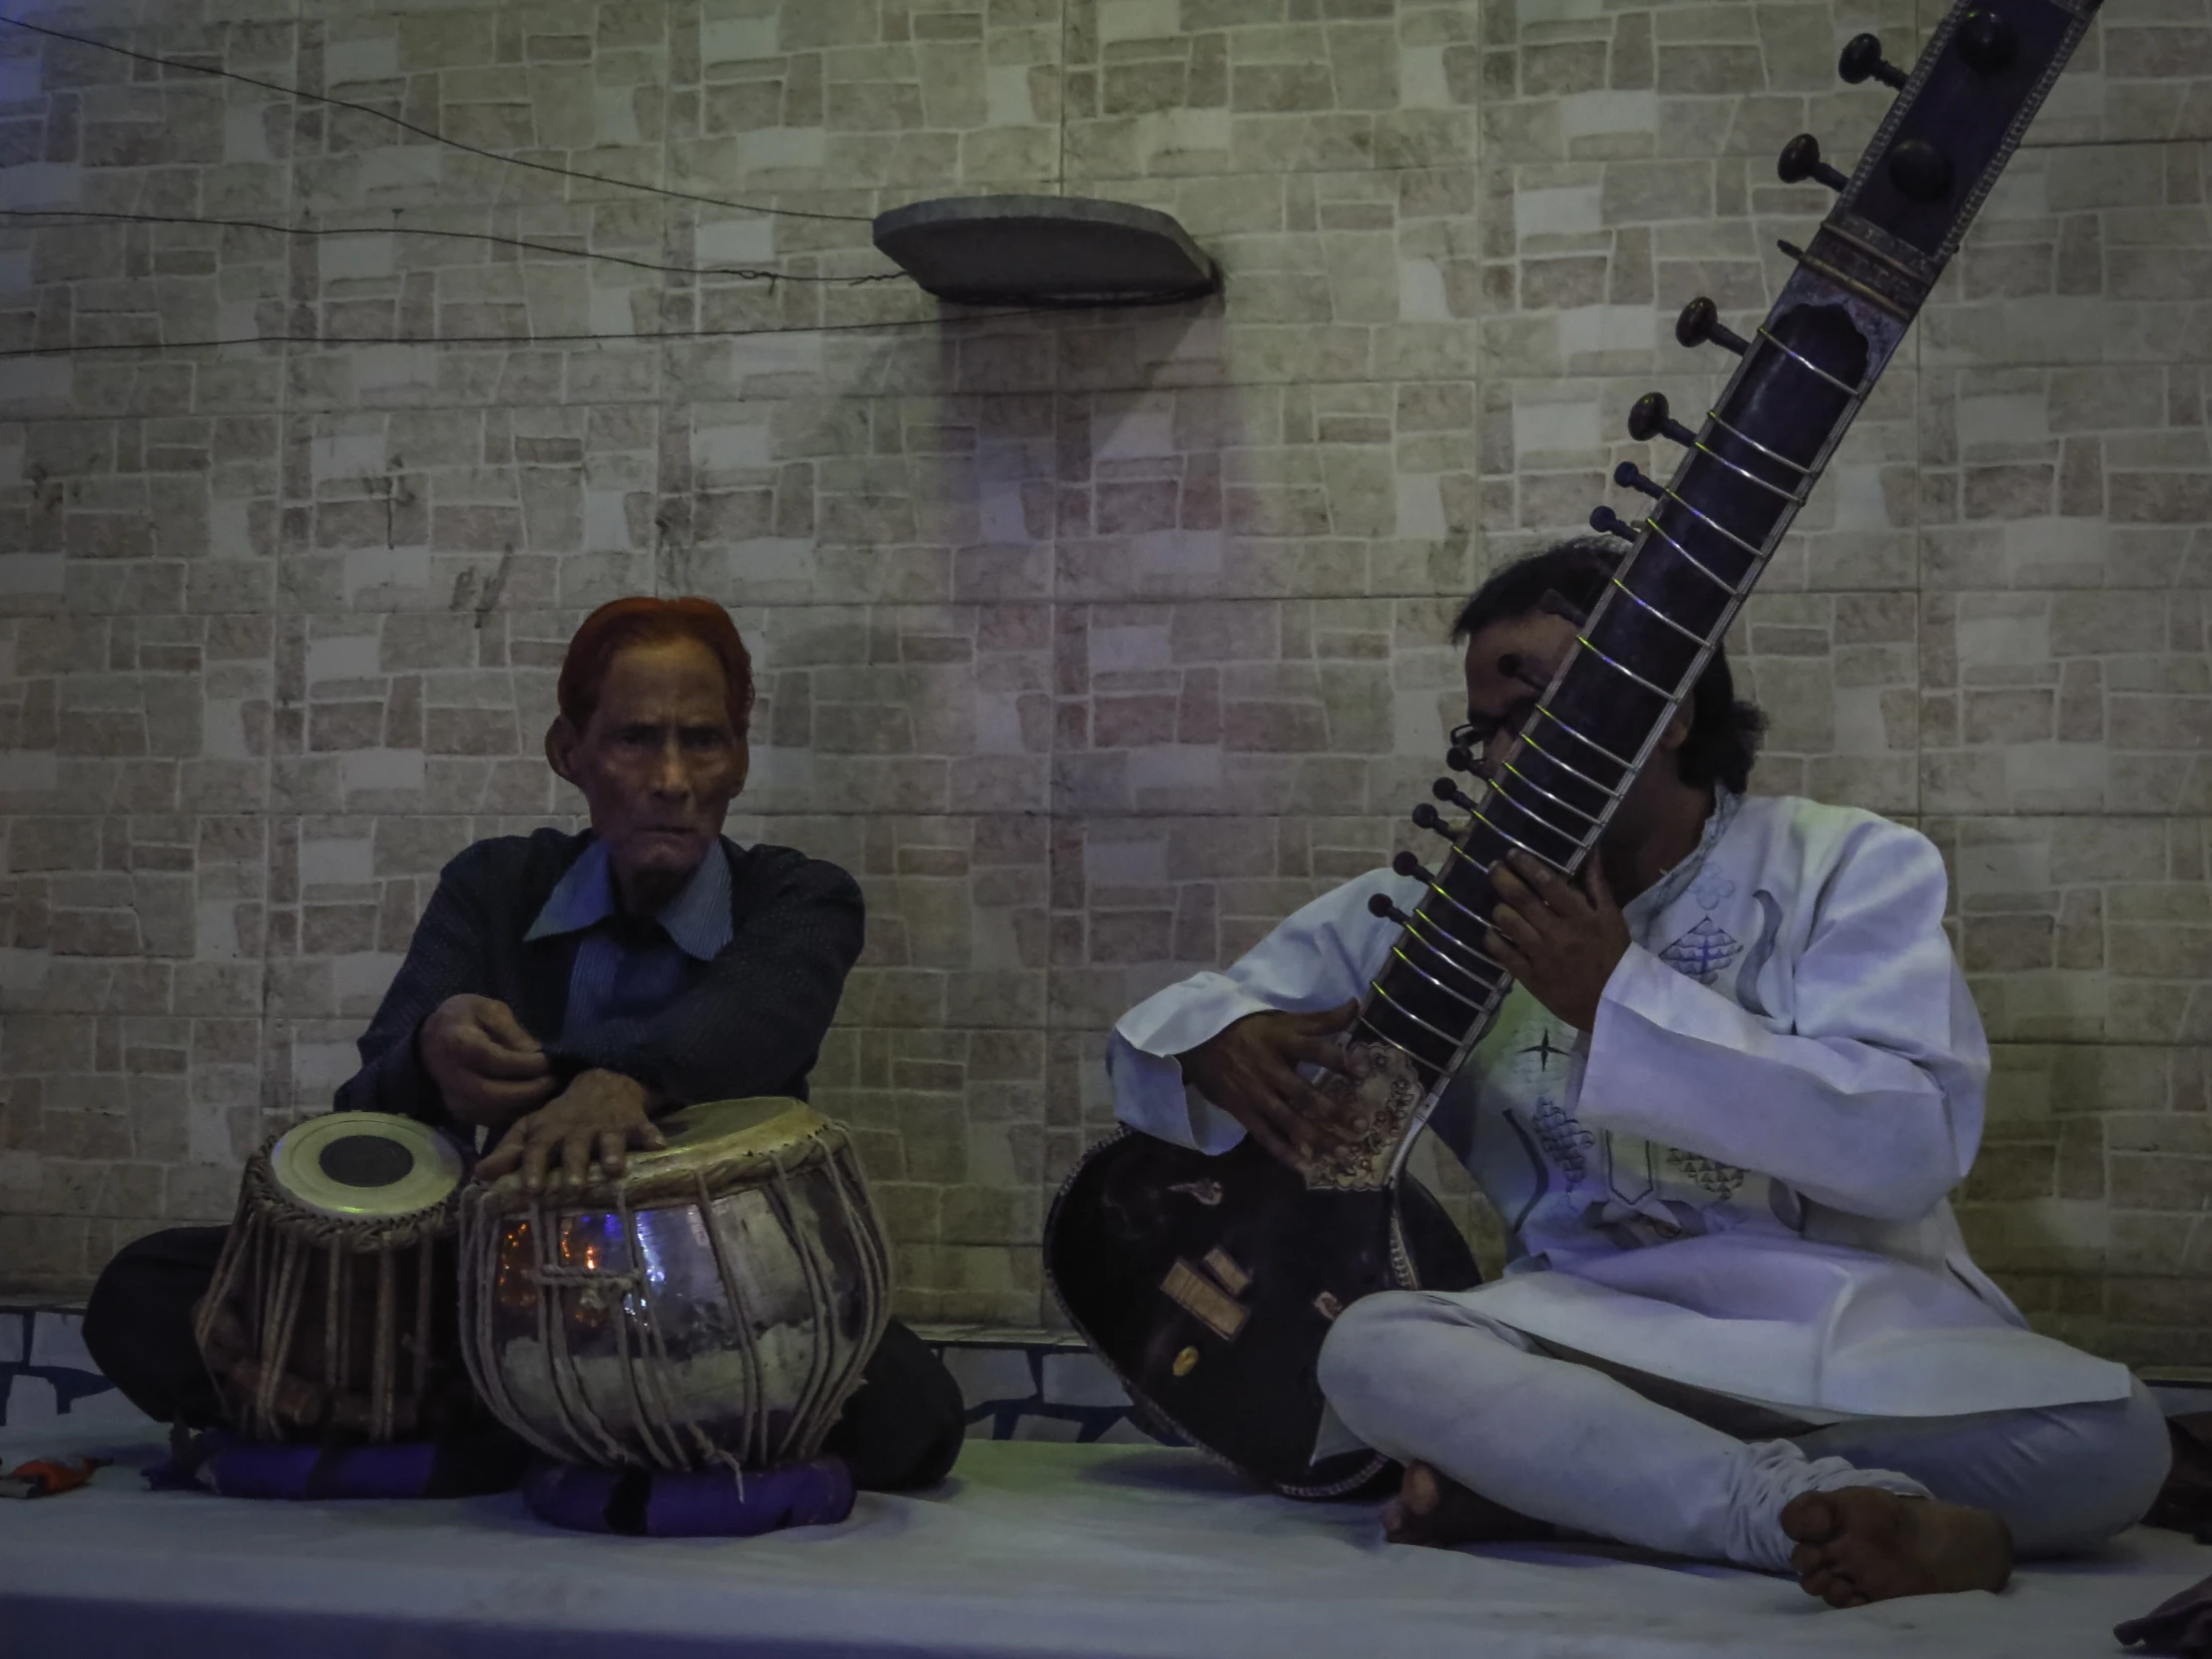 an indian man plays a sit down musical instrument next to a woman